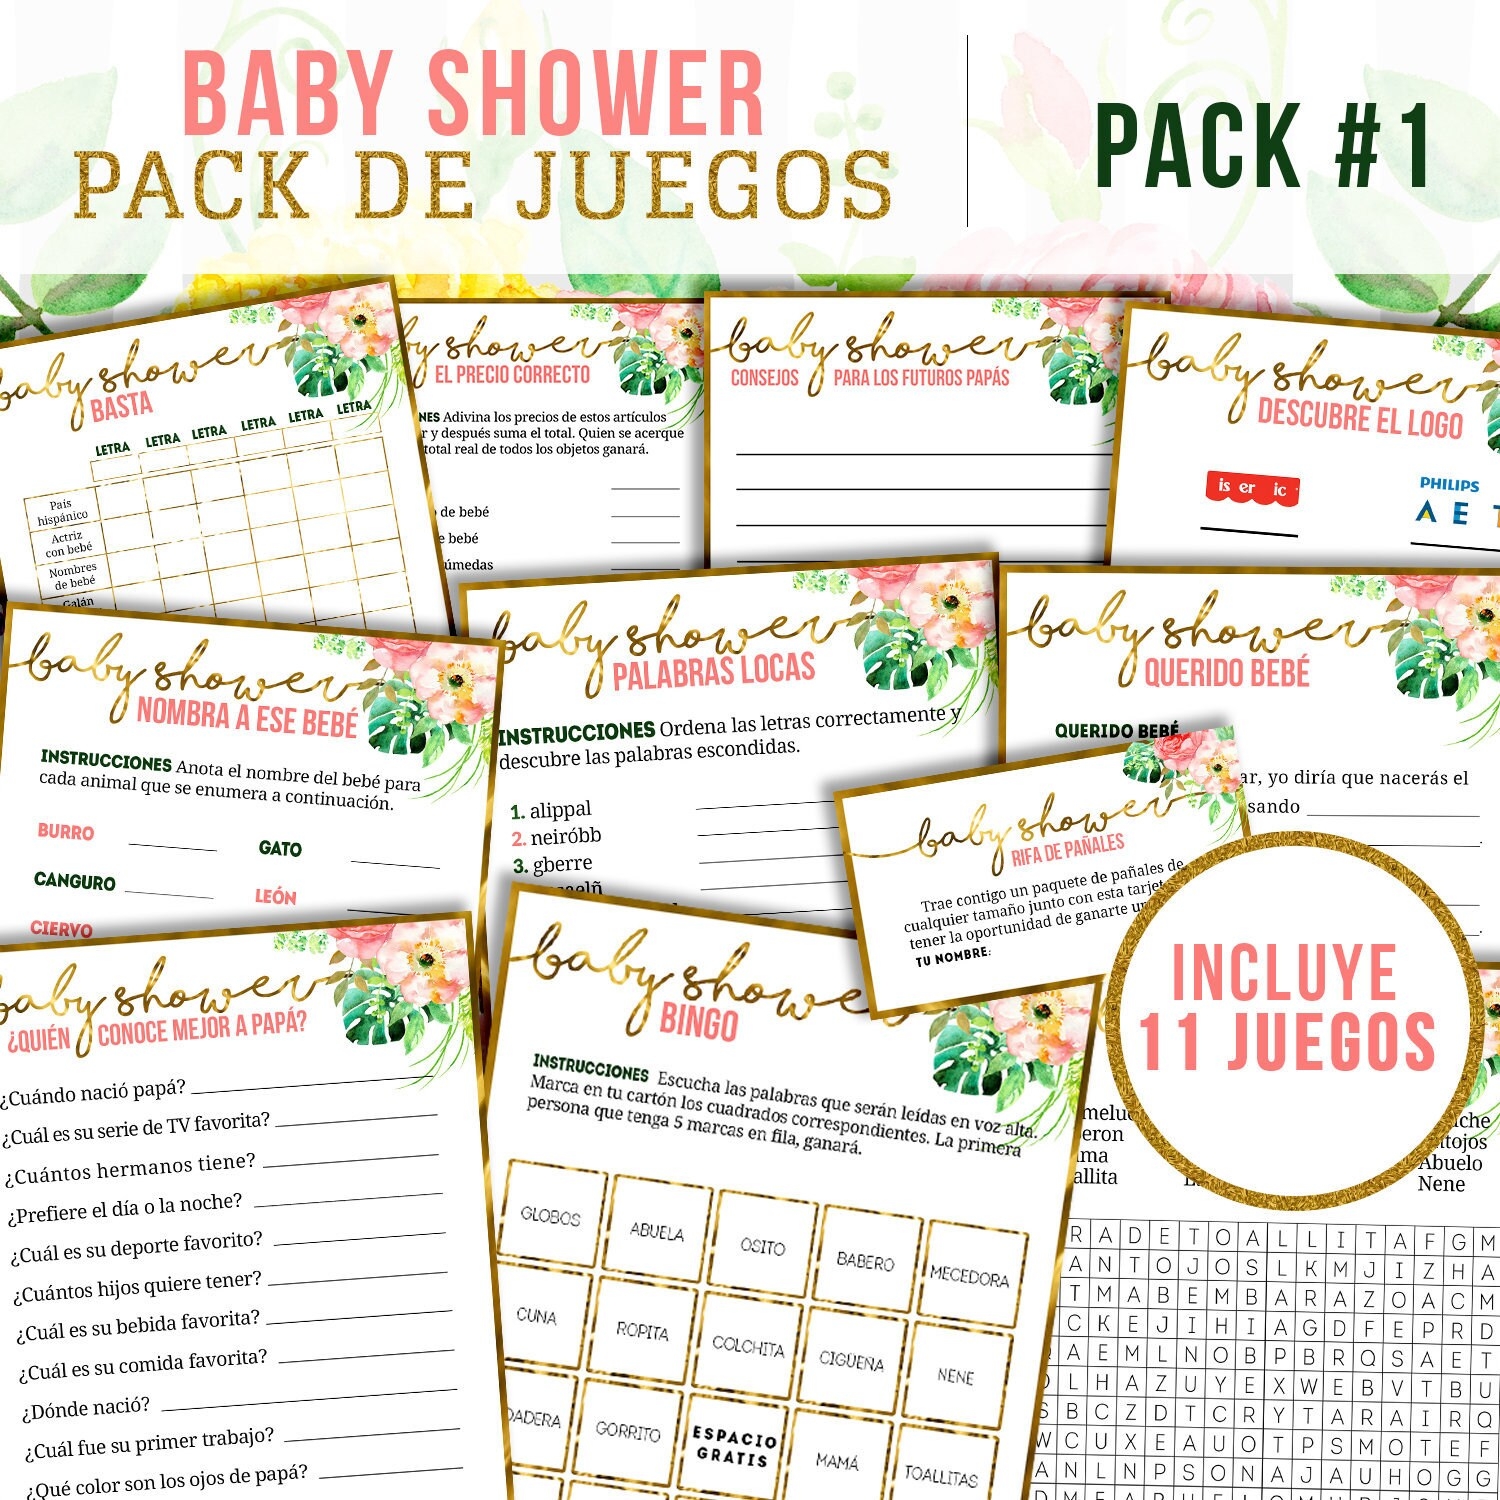 Baby Shower Games In Spanish Printable Games For Baby Shower In Spanish For Baby Girl Pink Flowers Tropical Baby Shower Etsy - Free Printable Baby Shower Games In Spanish